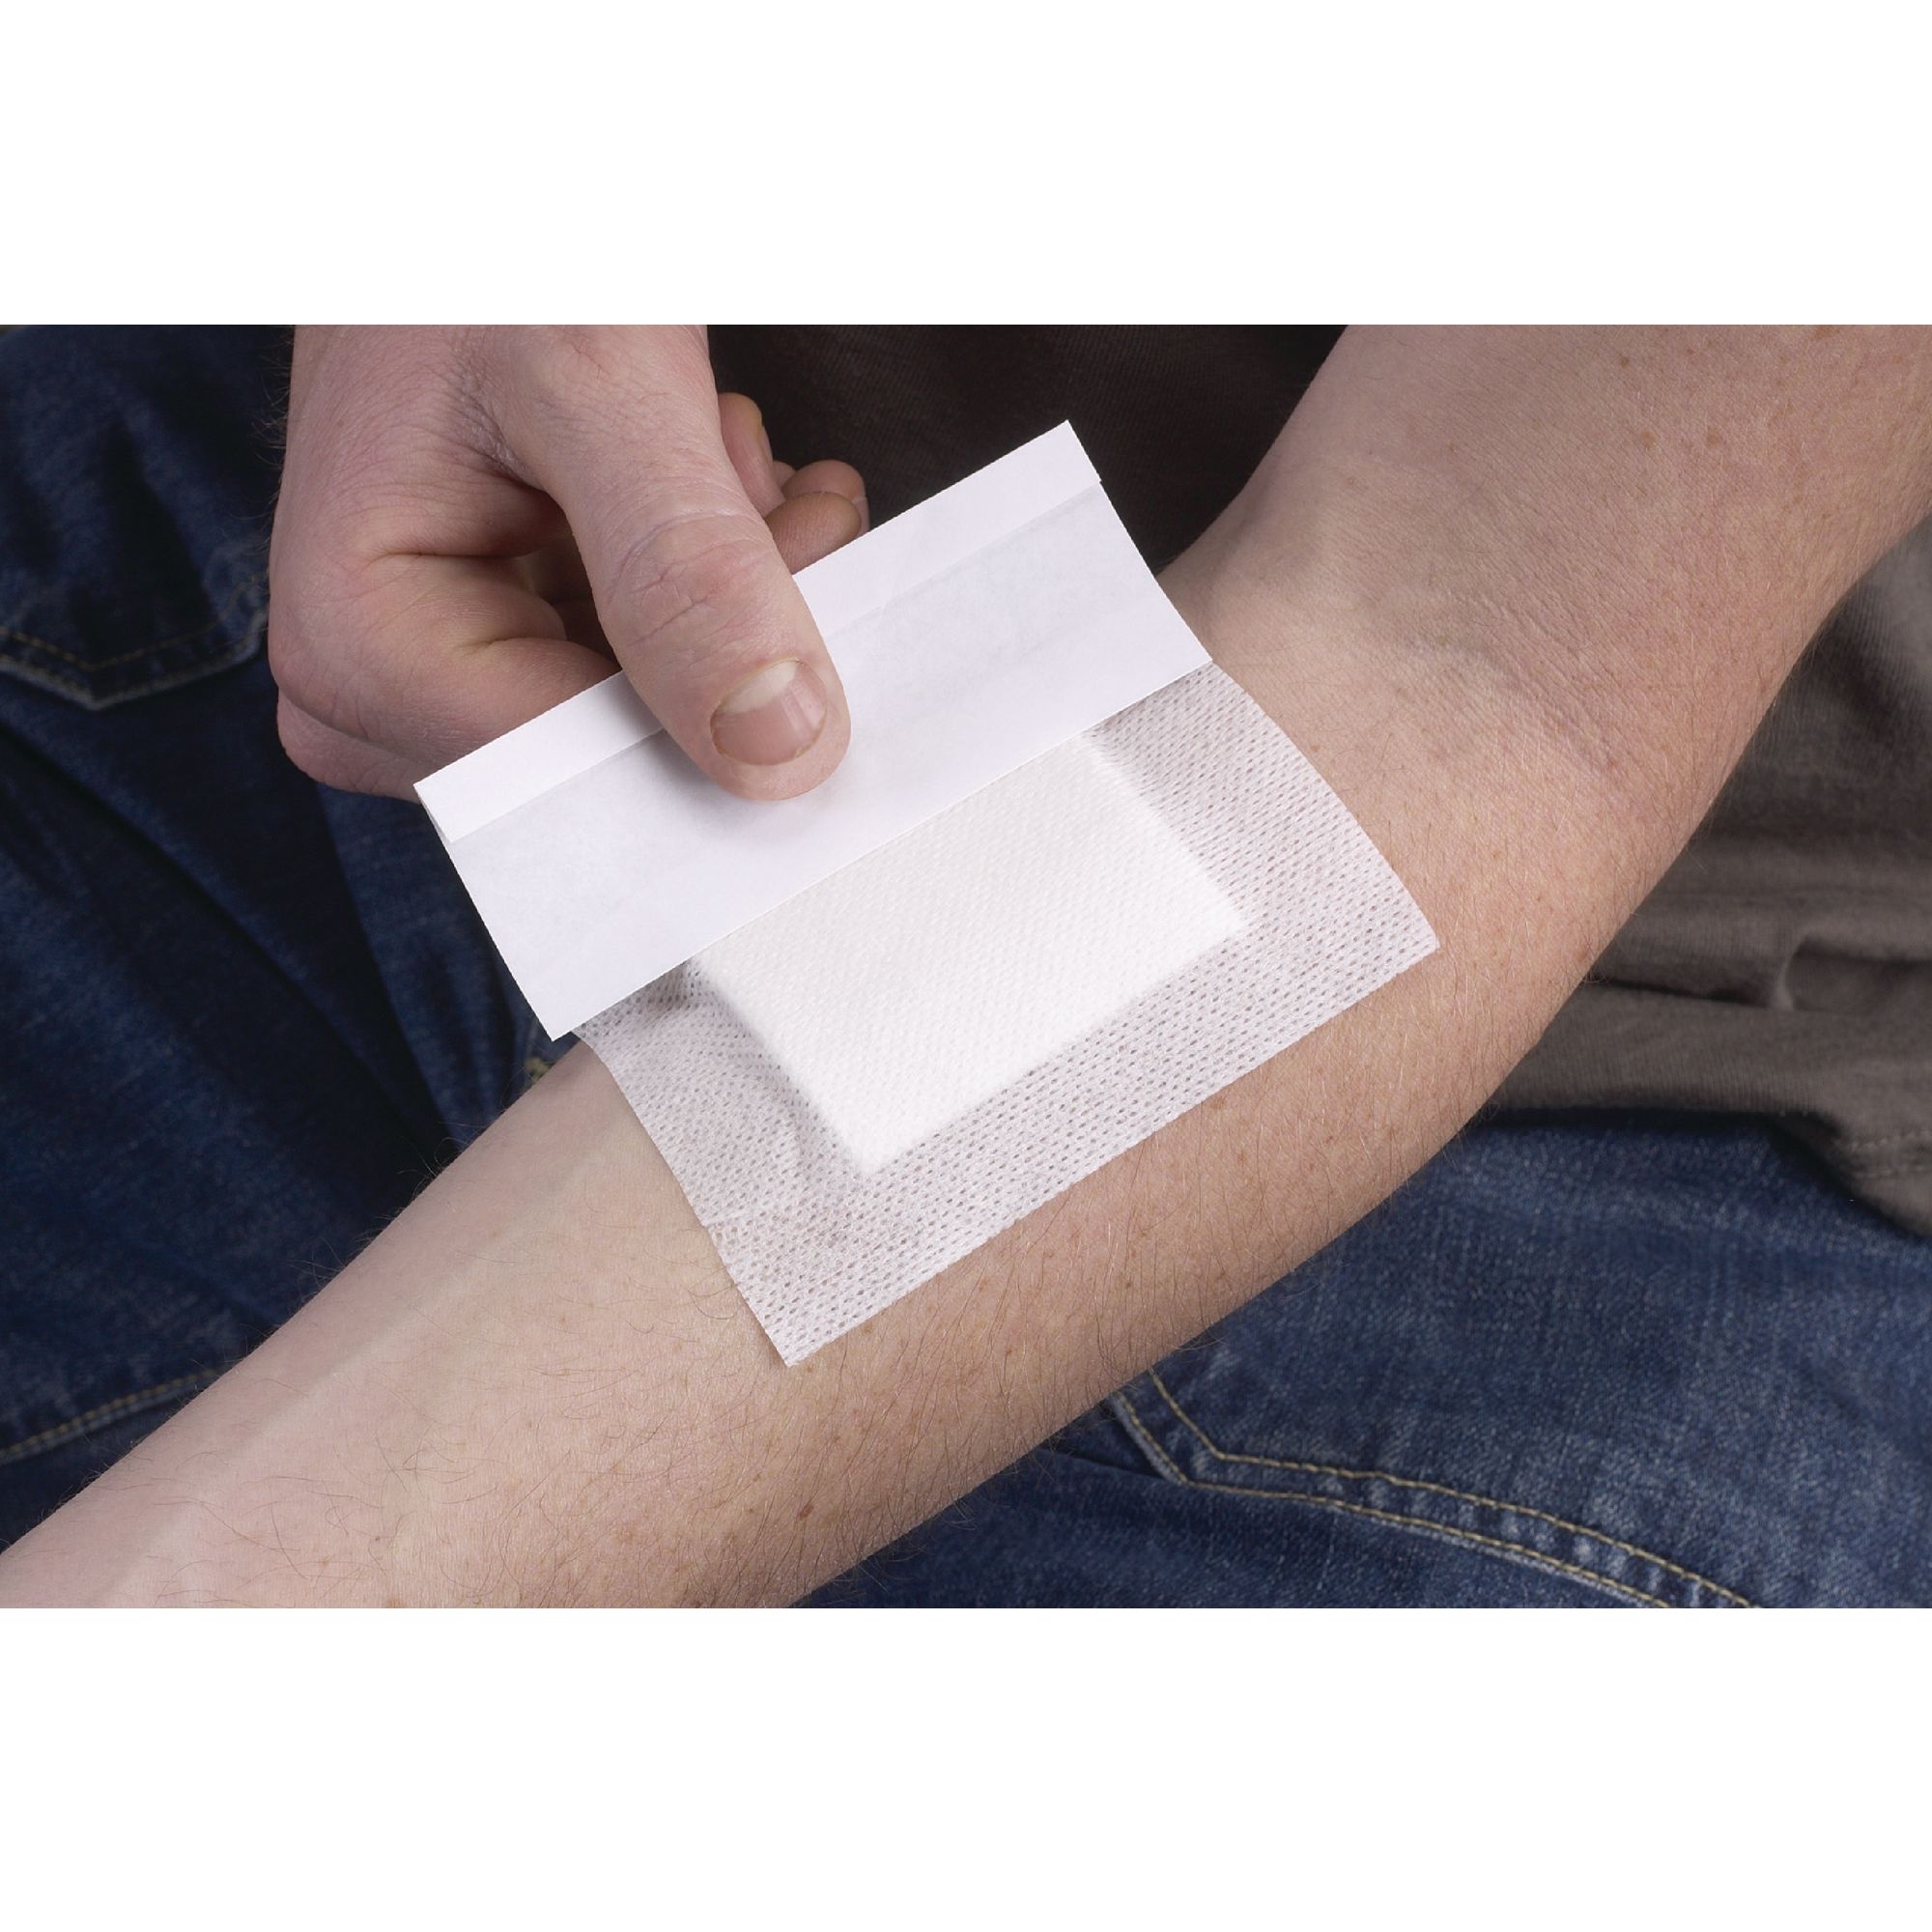 Adhesive Wound Dressings - 80 x 100mm